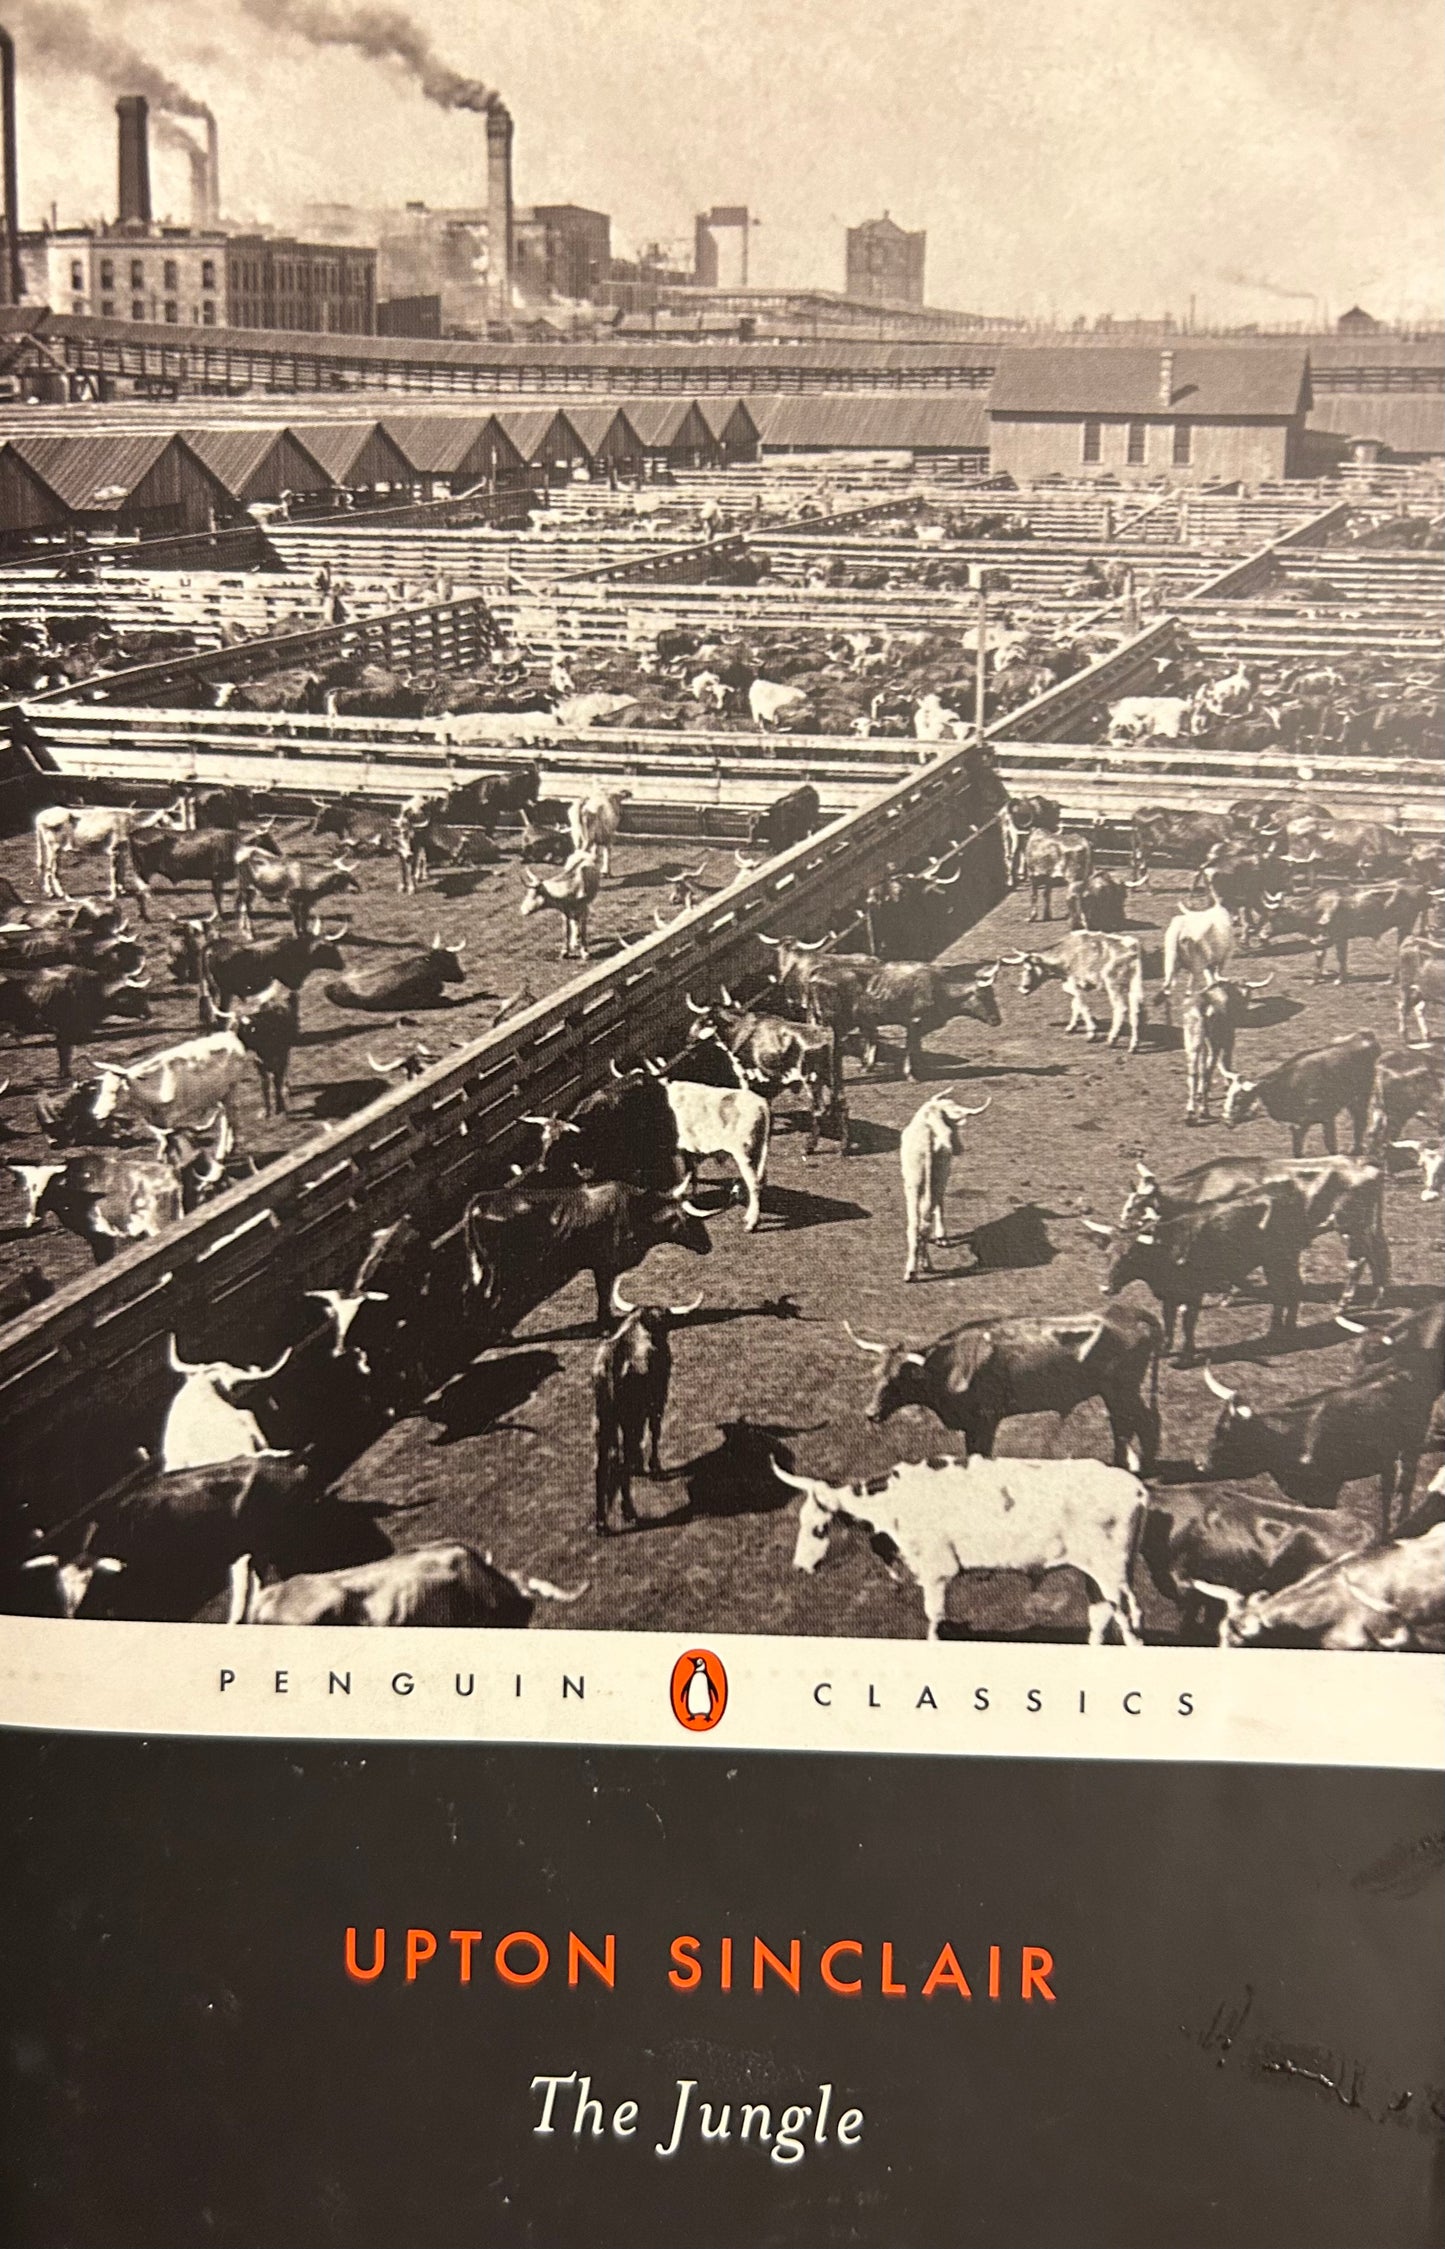 Penguin Classics: The Jungle by Upton Sinclair